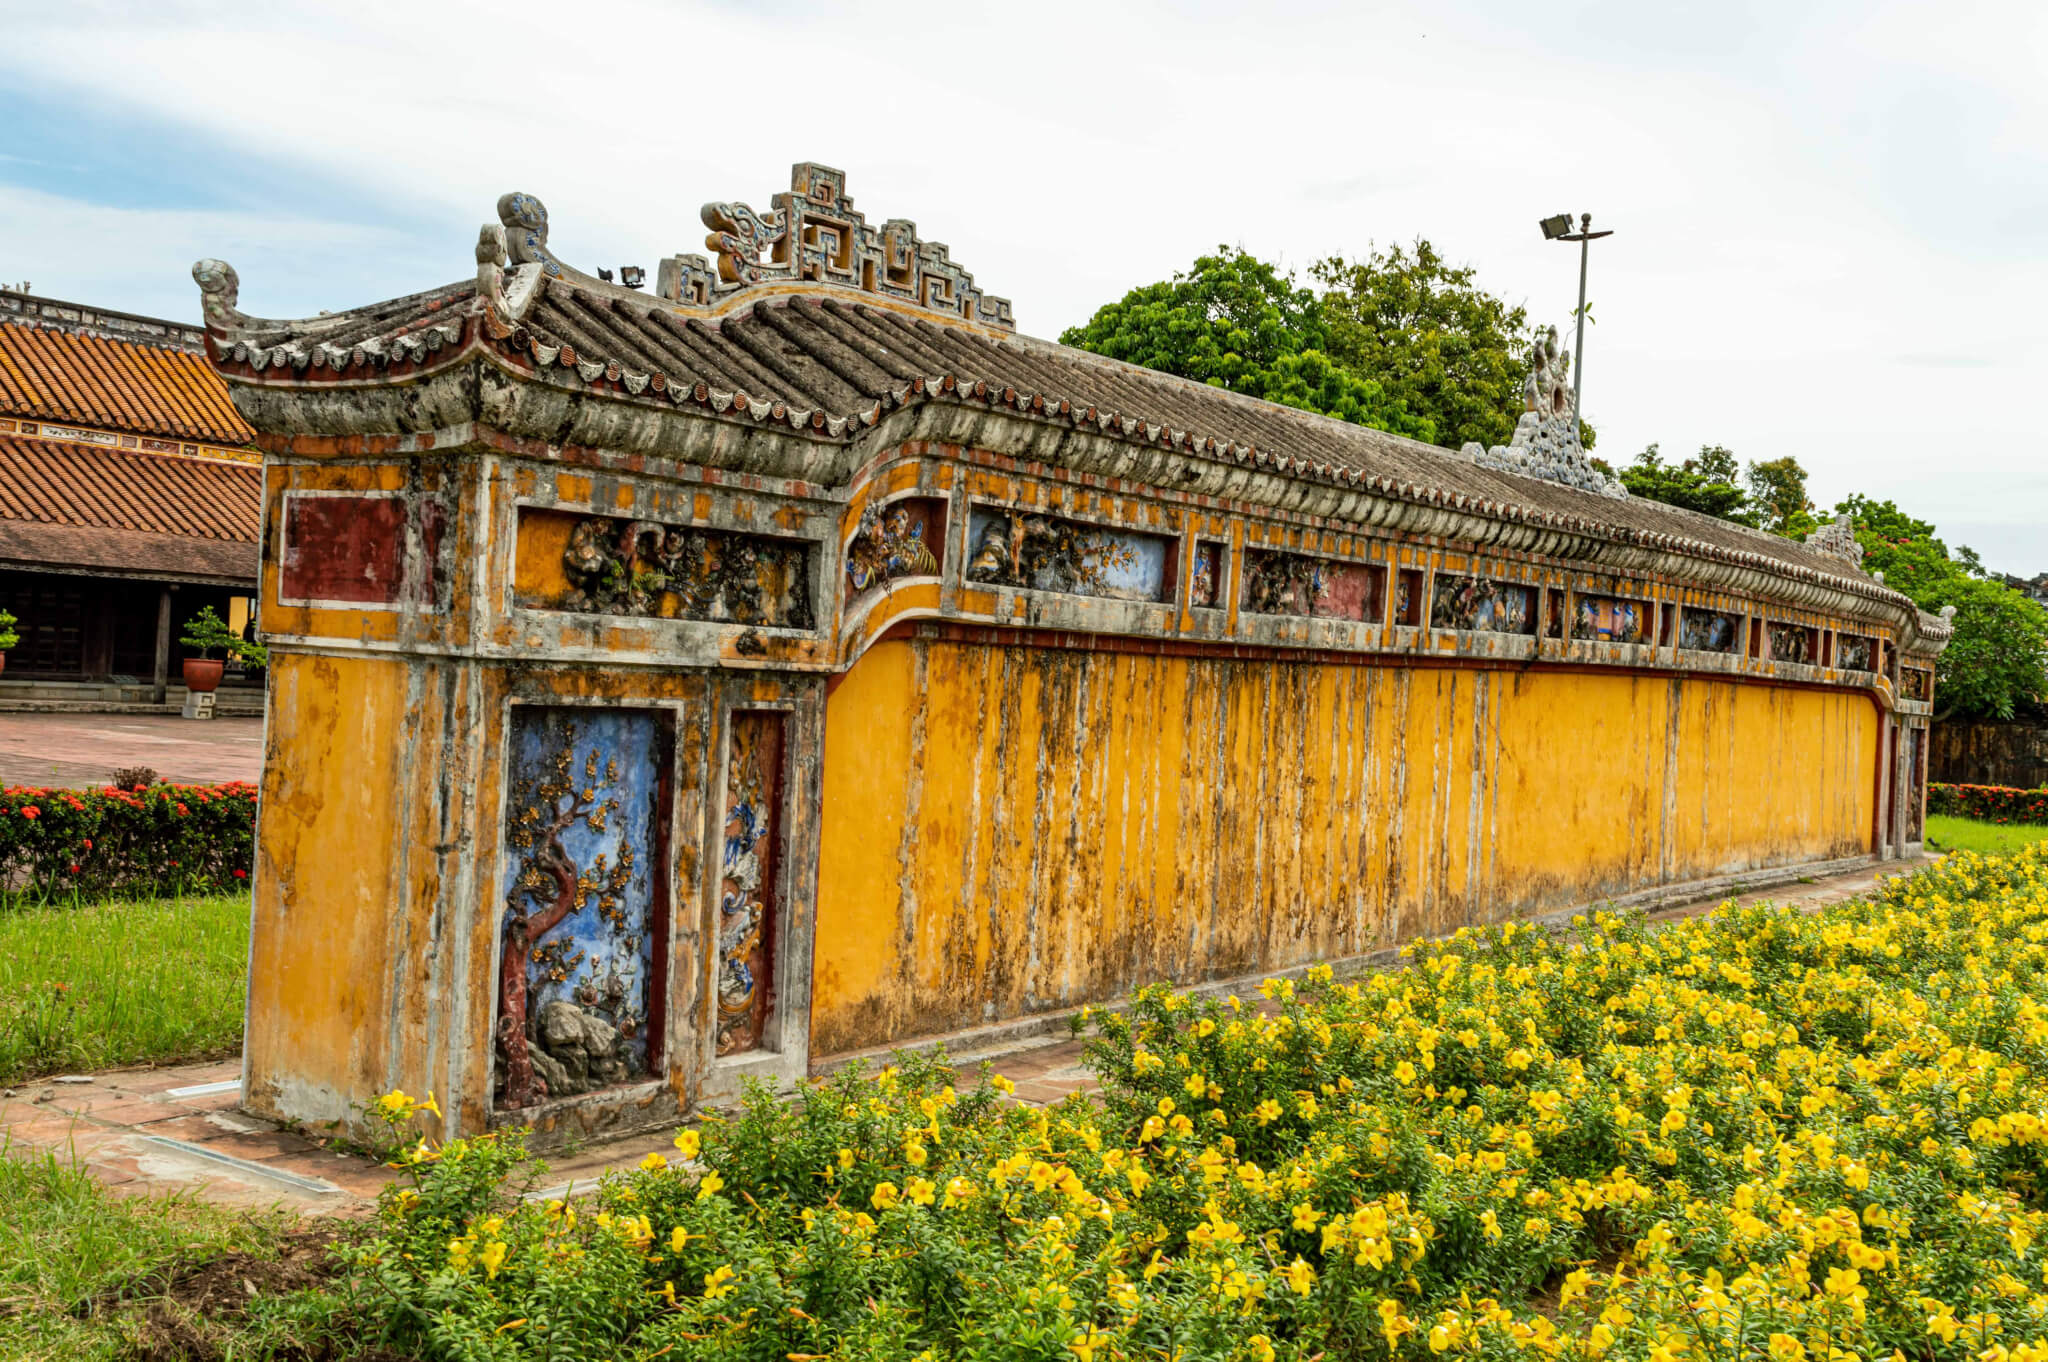 Exploring the Imperial Palace of Hue in Vietnam